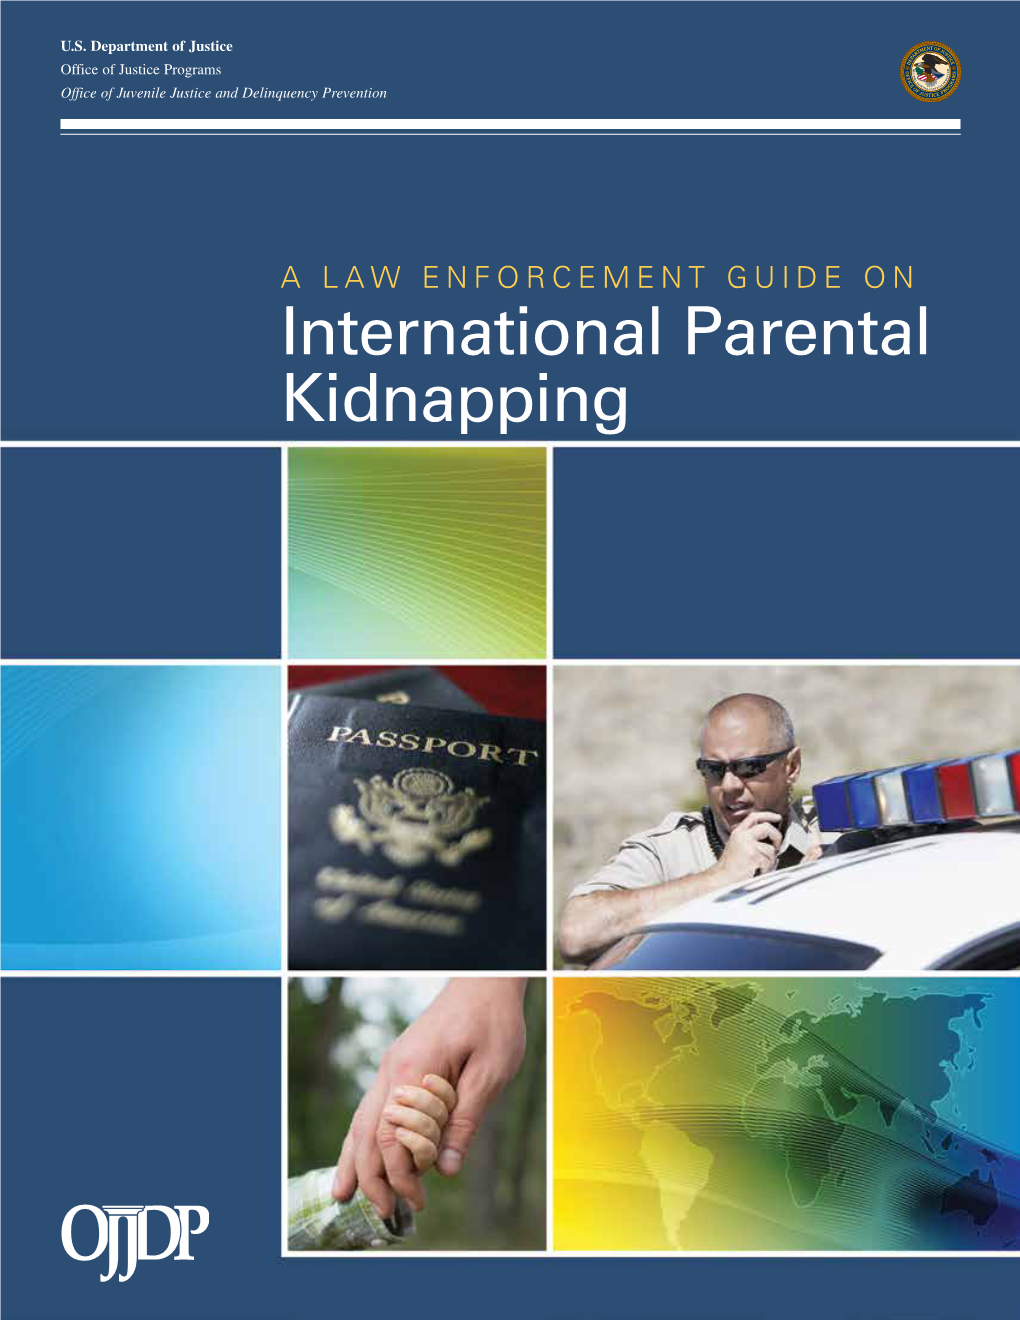 A LAW ENFORCEMENT GUIDE on International Parental Kidnapping U.S